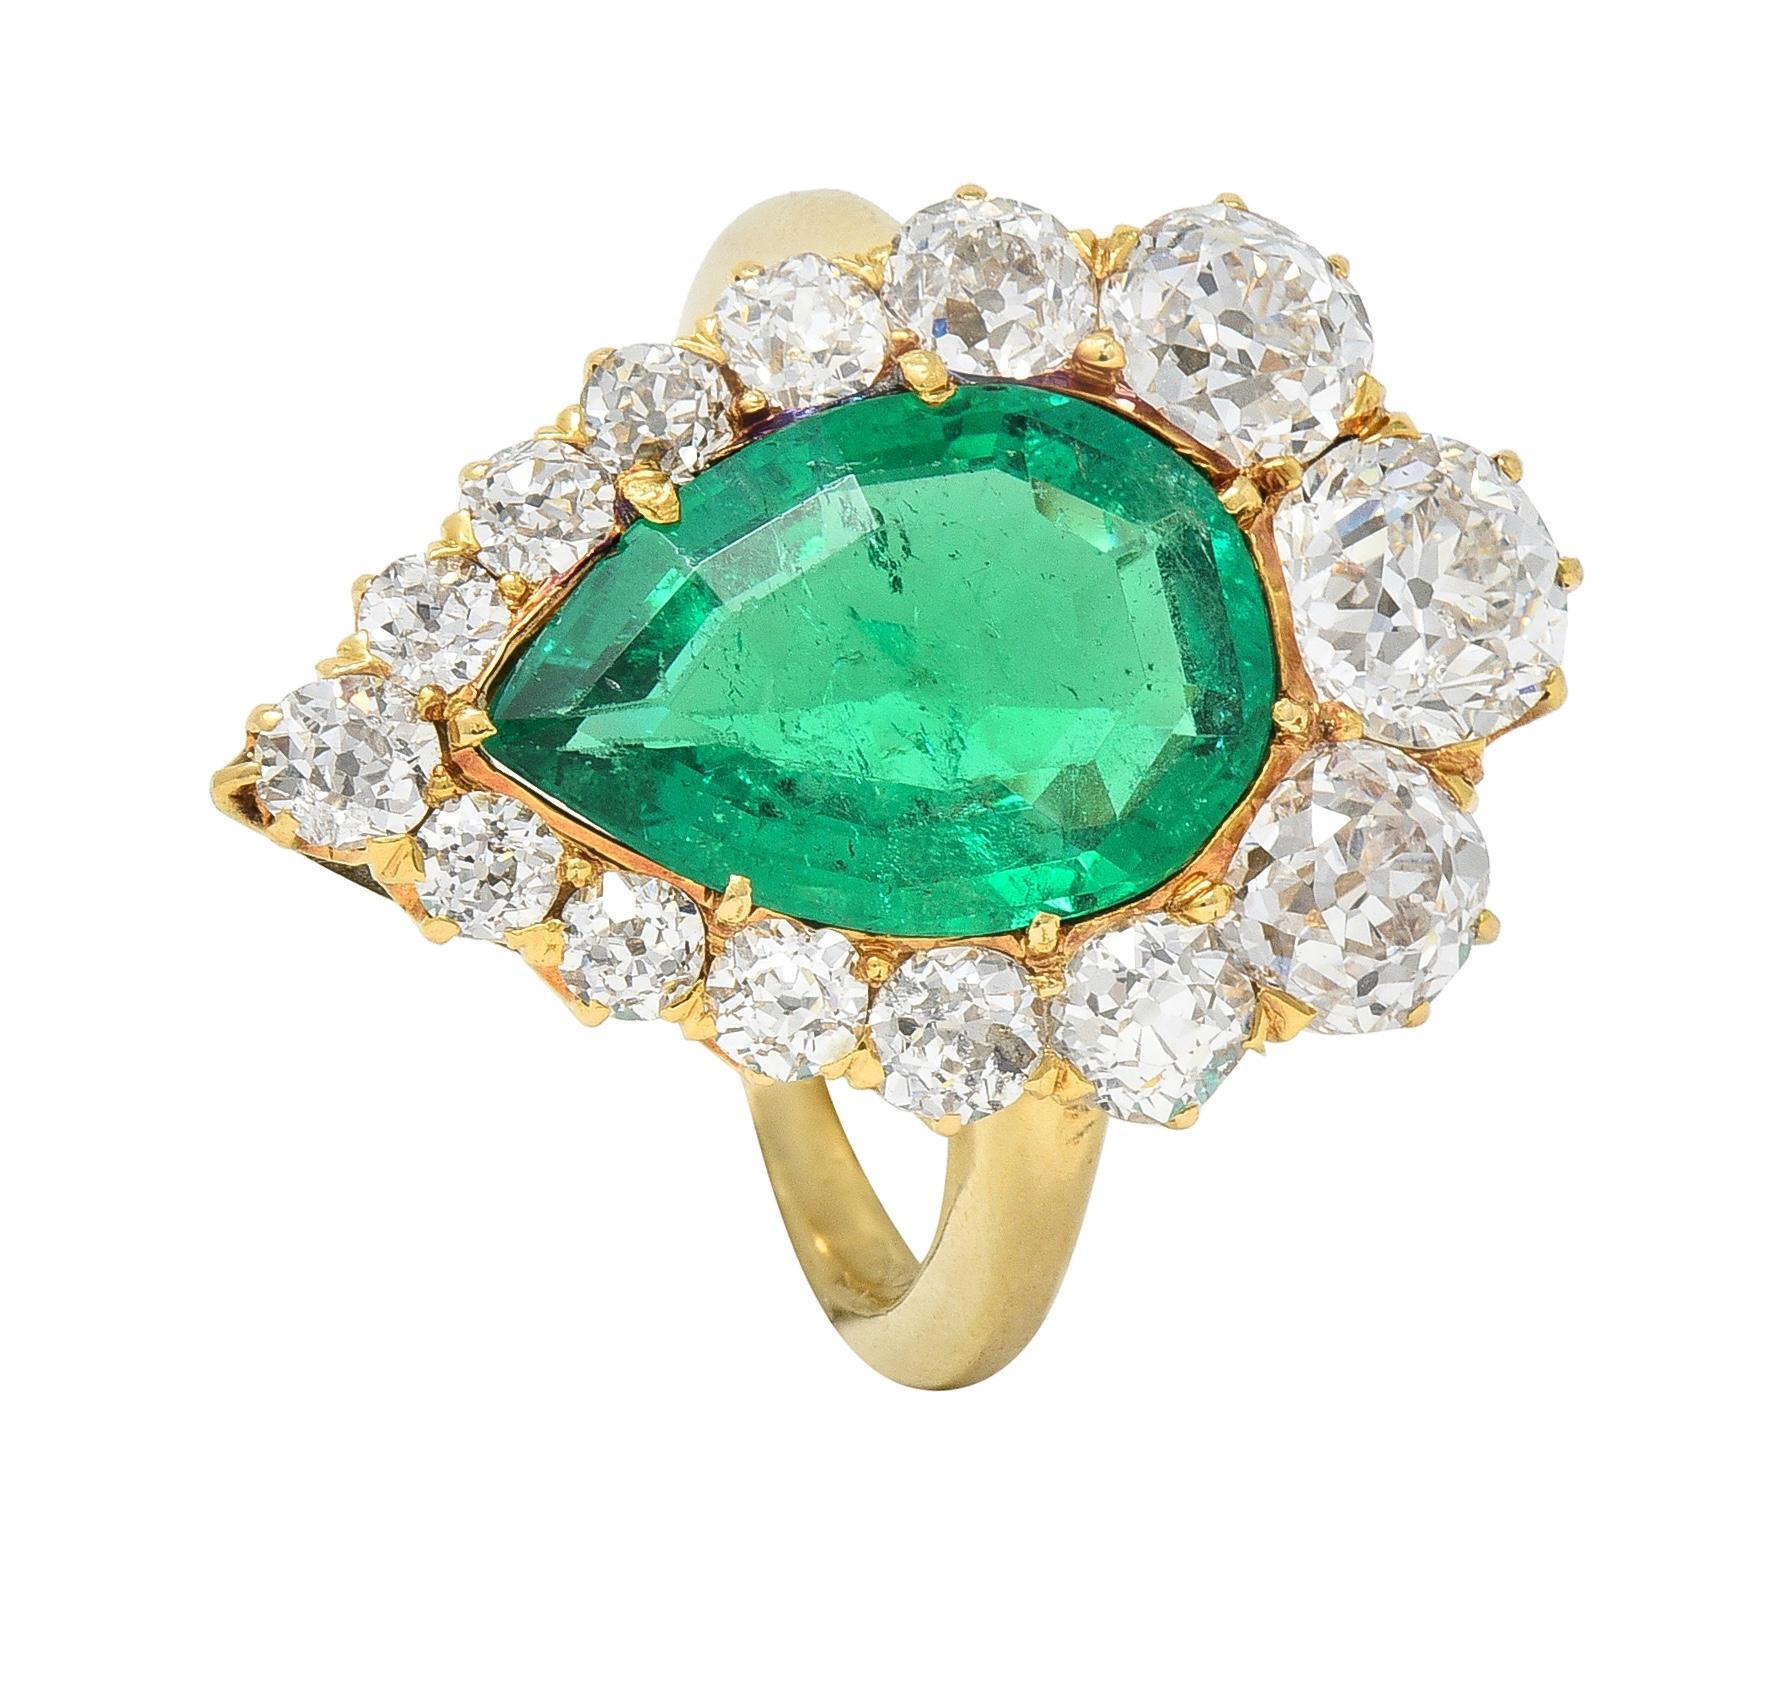 Late Victorian 5.34 CTW Pear Colombian Emerald Diamond 18 Karat Gold Ring AGL For Sale 4